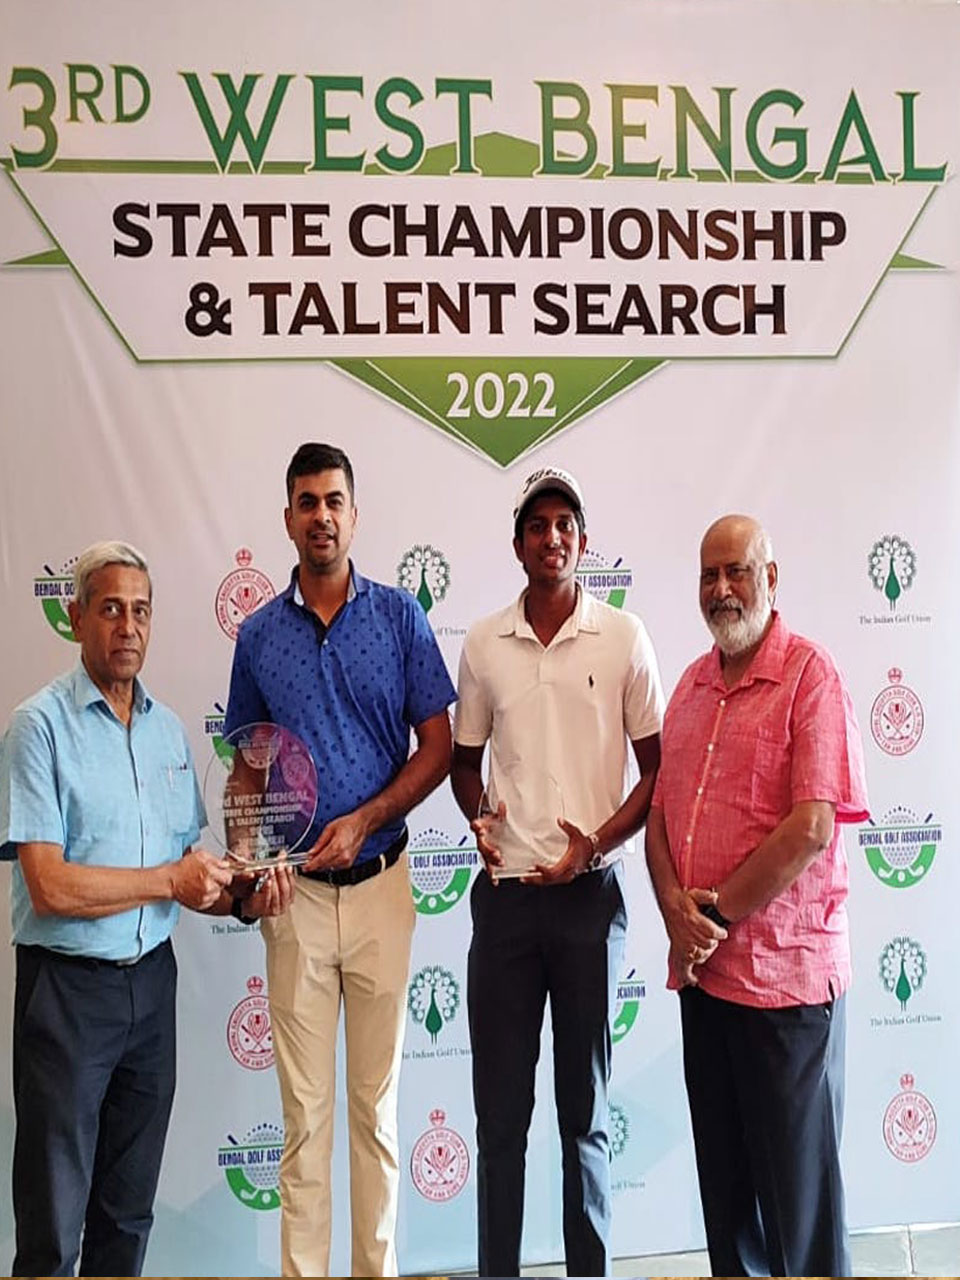 Aryan won his second place finish in trying conditions at the Royal Calcutta Golf Club